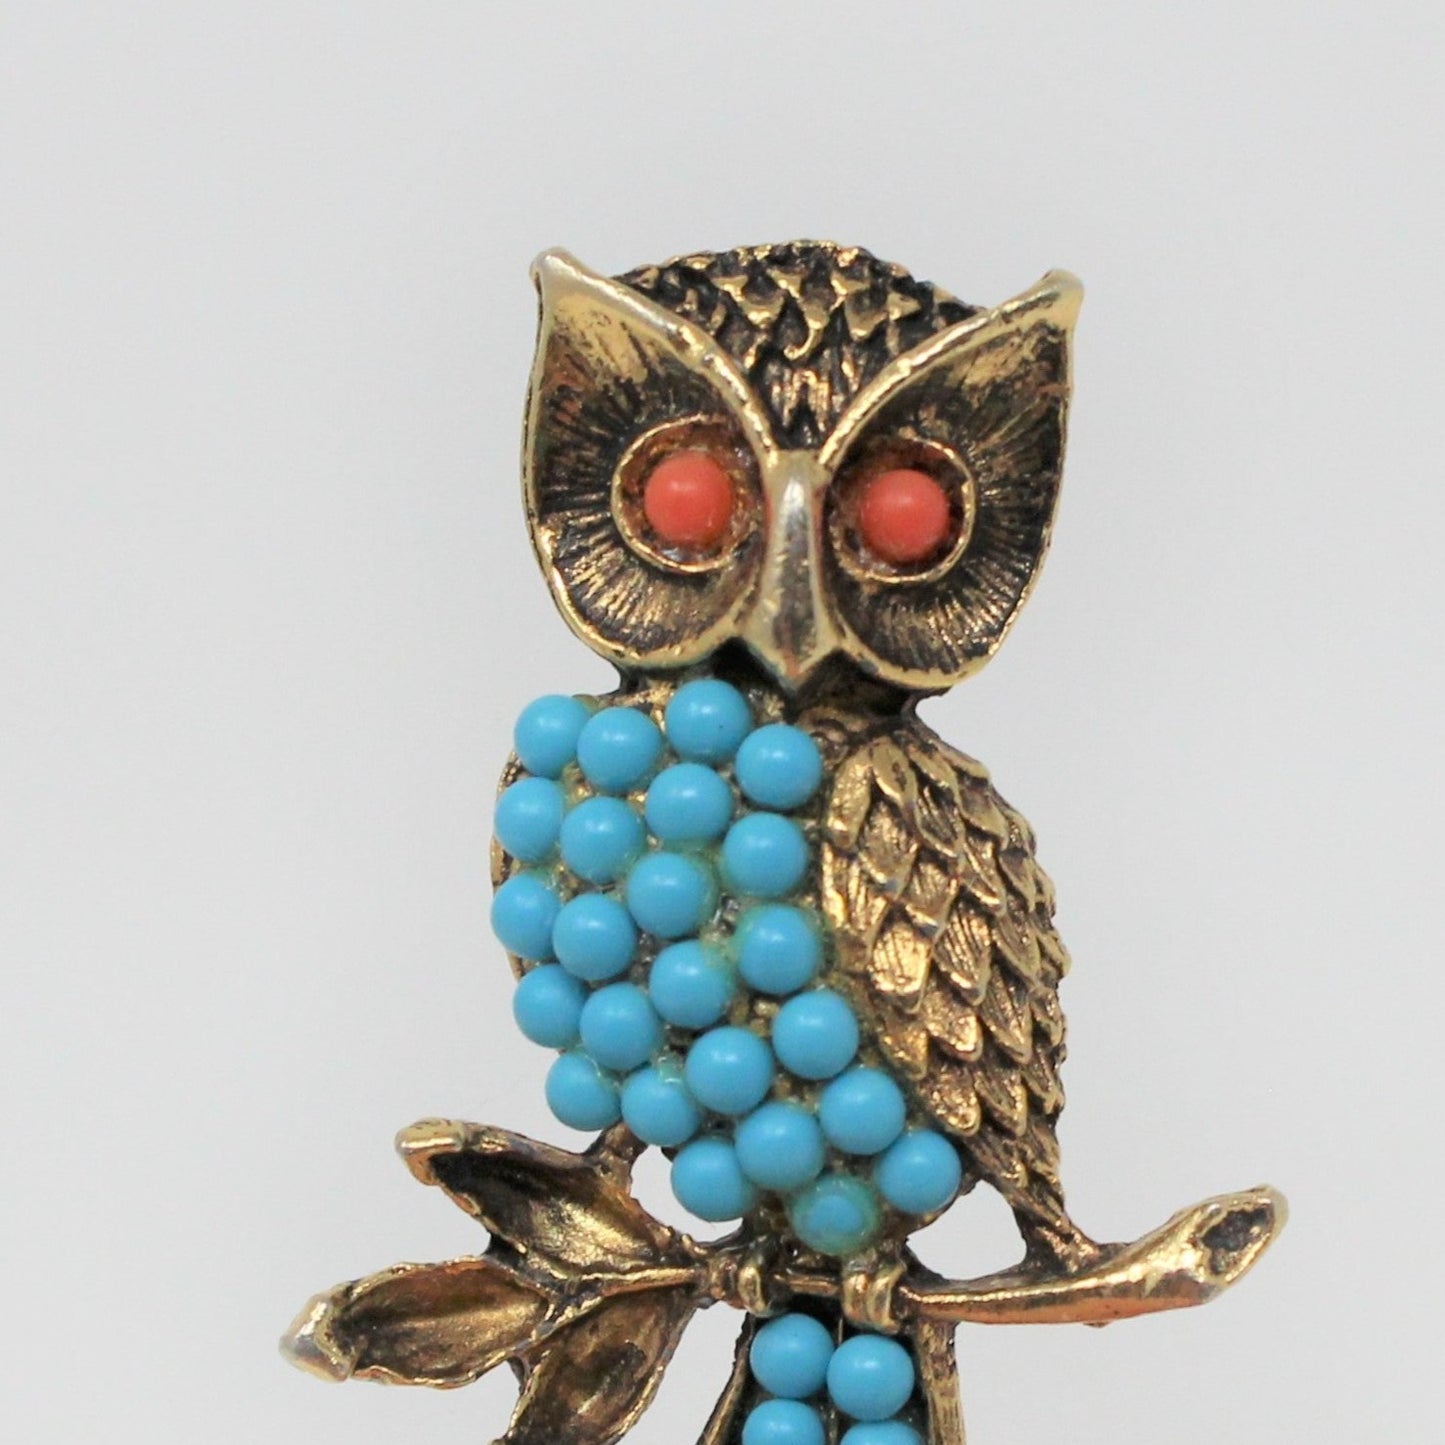 Brooch / Pin, Figural Owl, Faux Turquoise and Coral Beads, Antique Gold Tone, Vintage